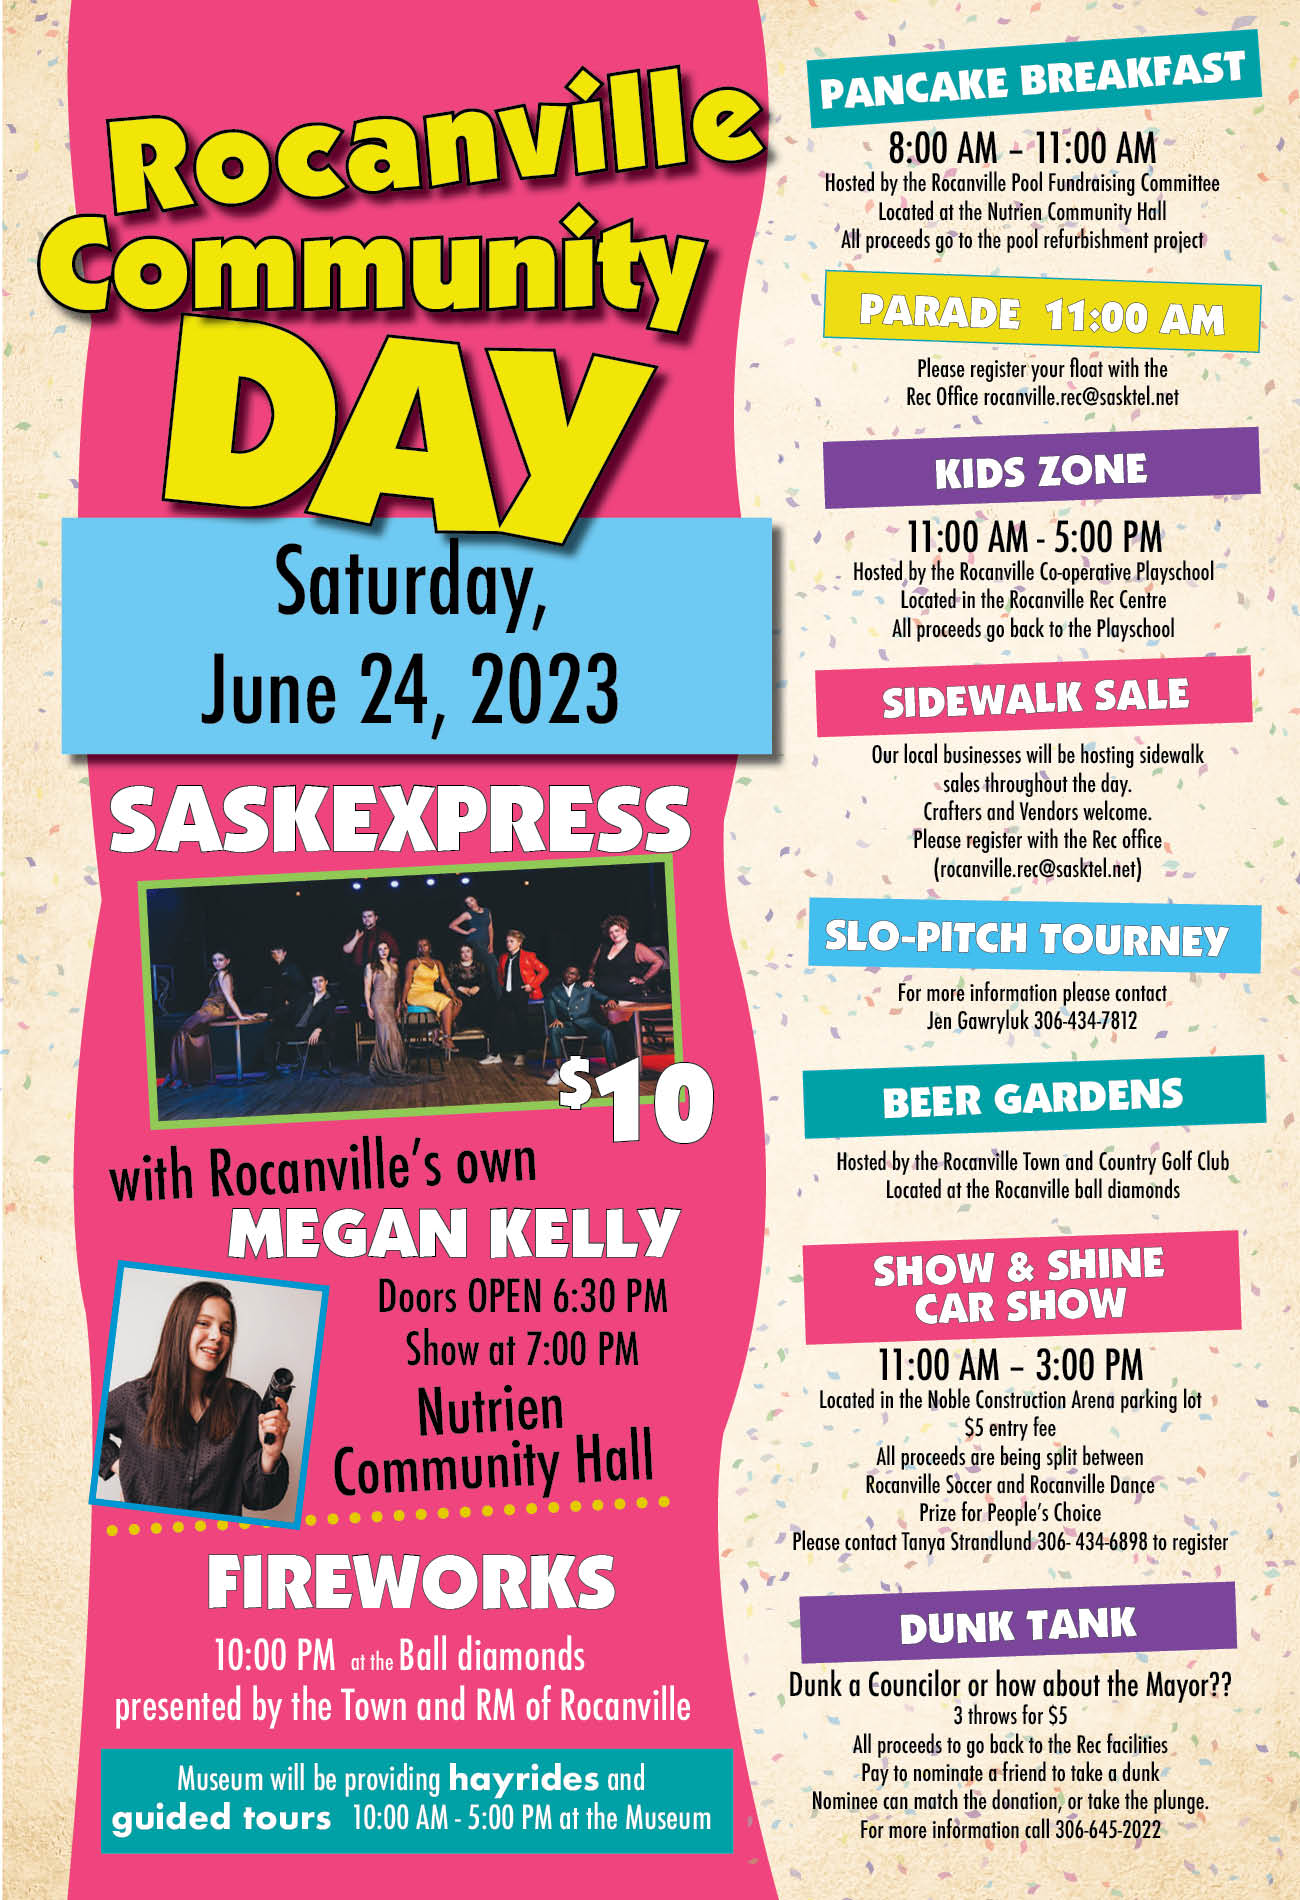 Rocanville Community Day